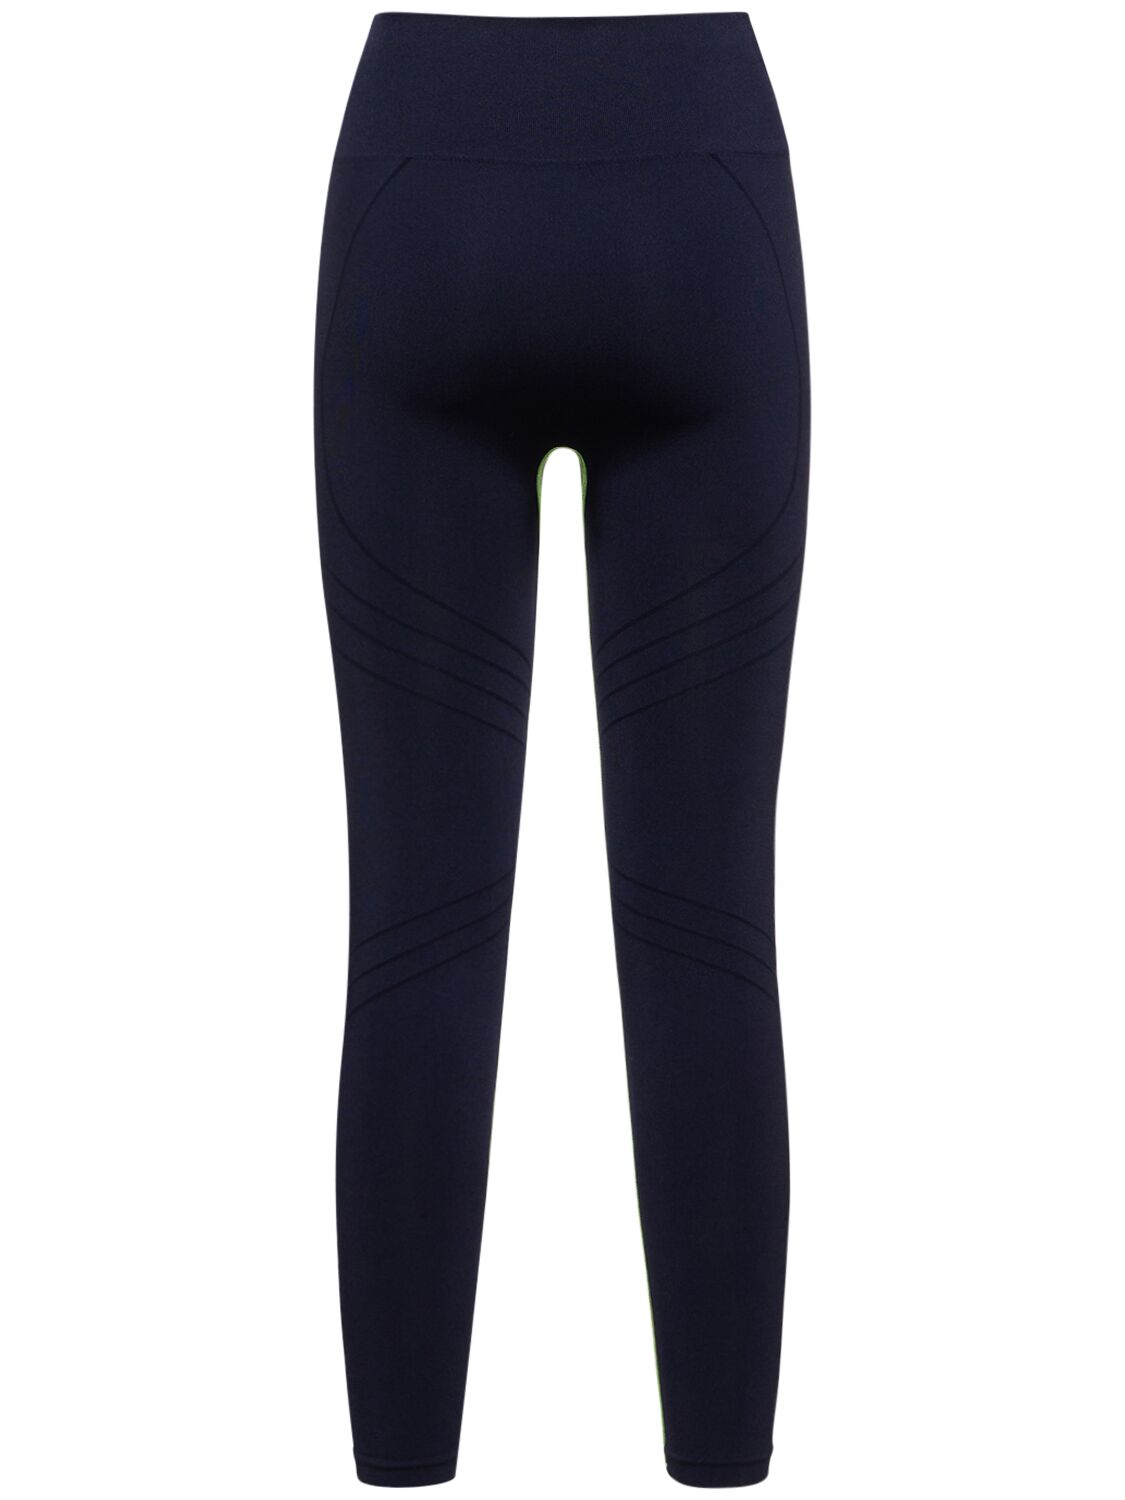 Prism Squared Lucid High Waist 7/8 Tights In Navy